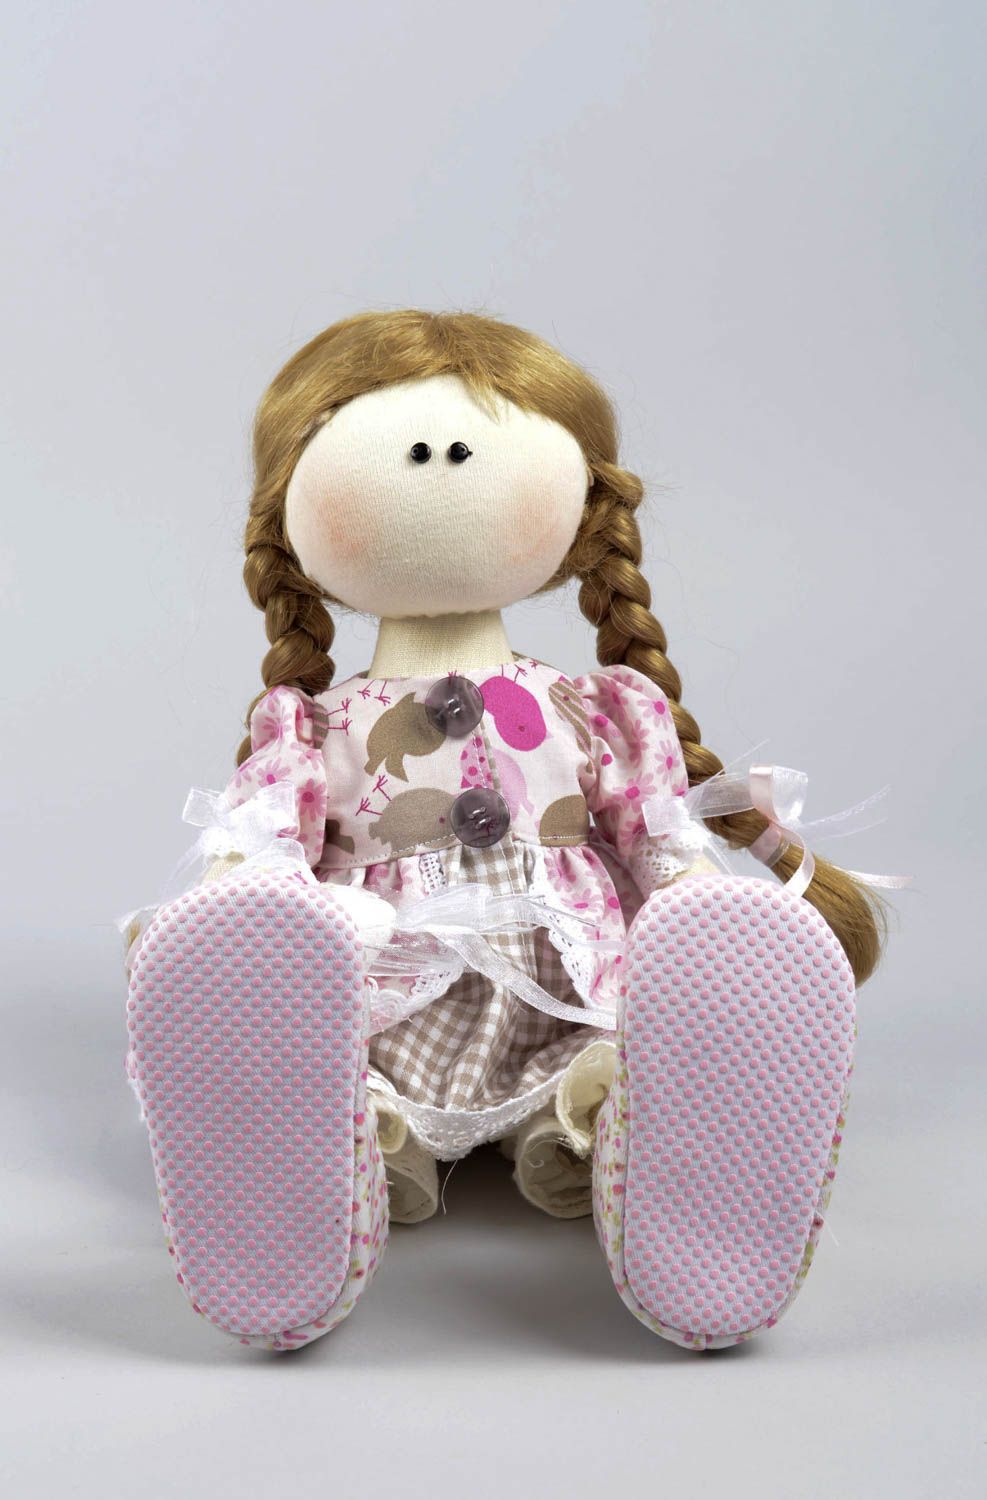 Beautiful handmade rag doll best toys for kids stuffed fabric toy gift ideas photo 4